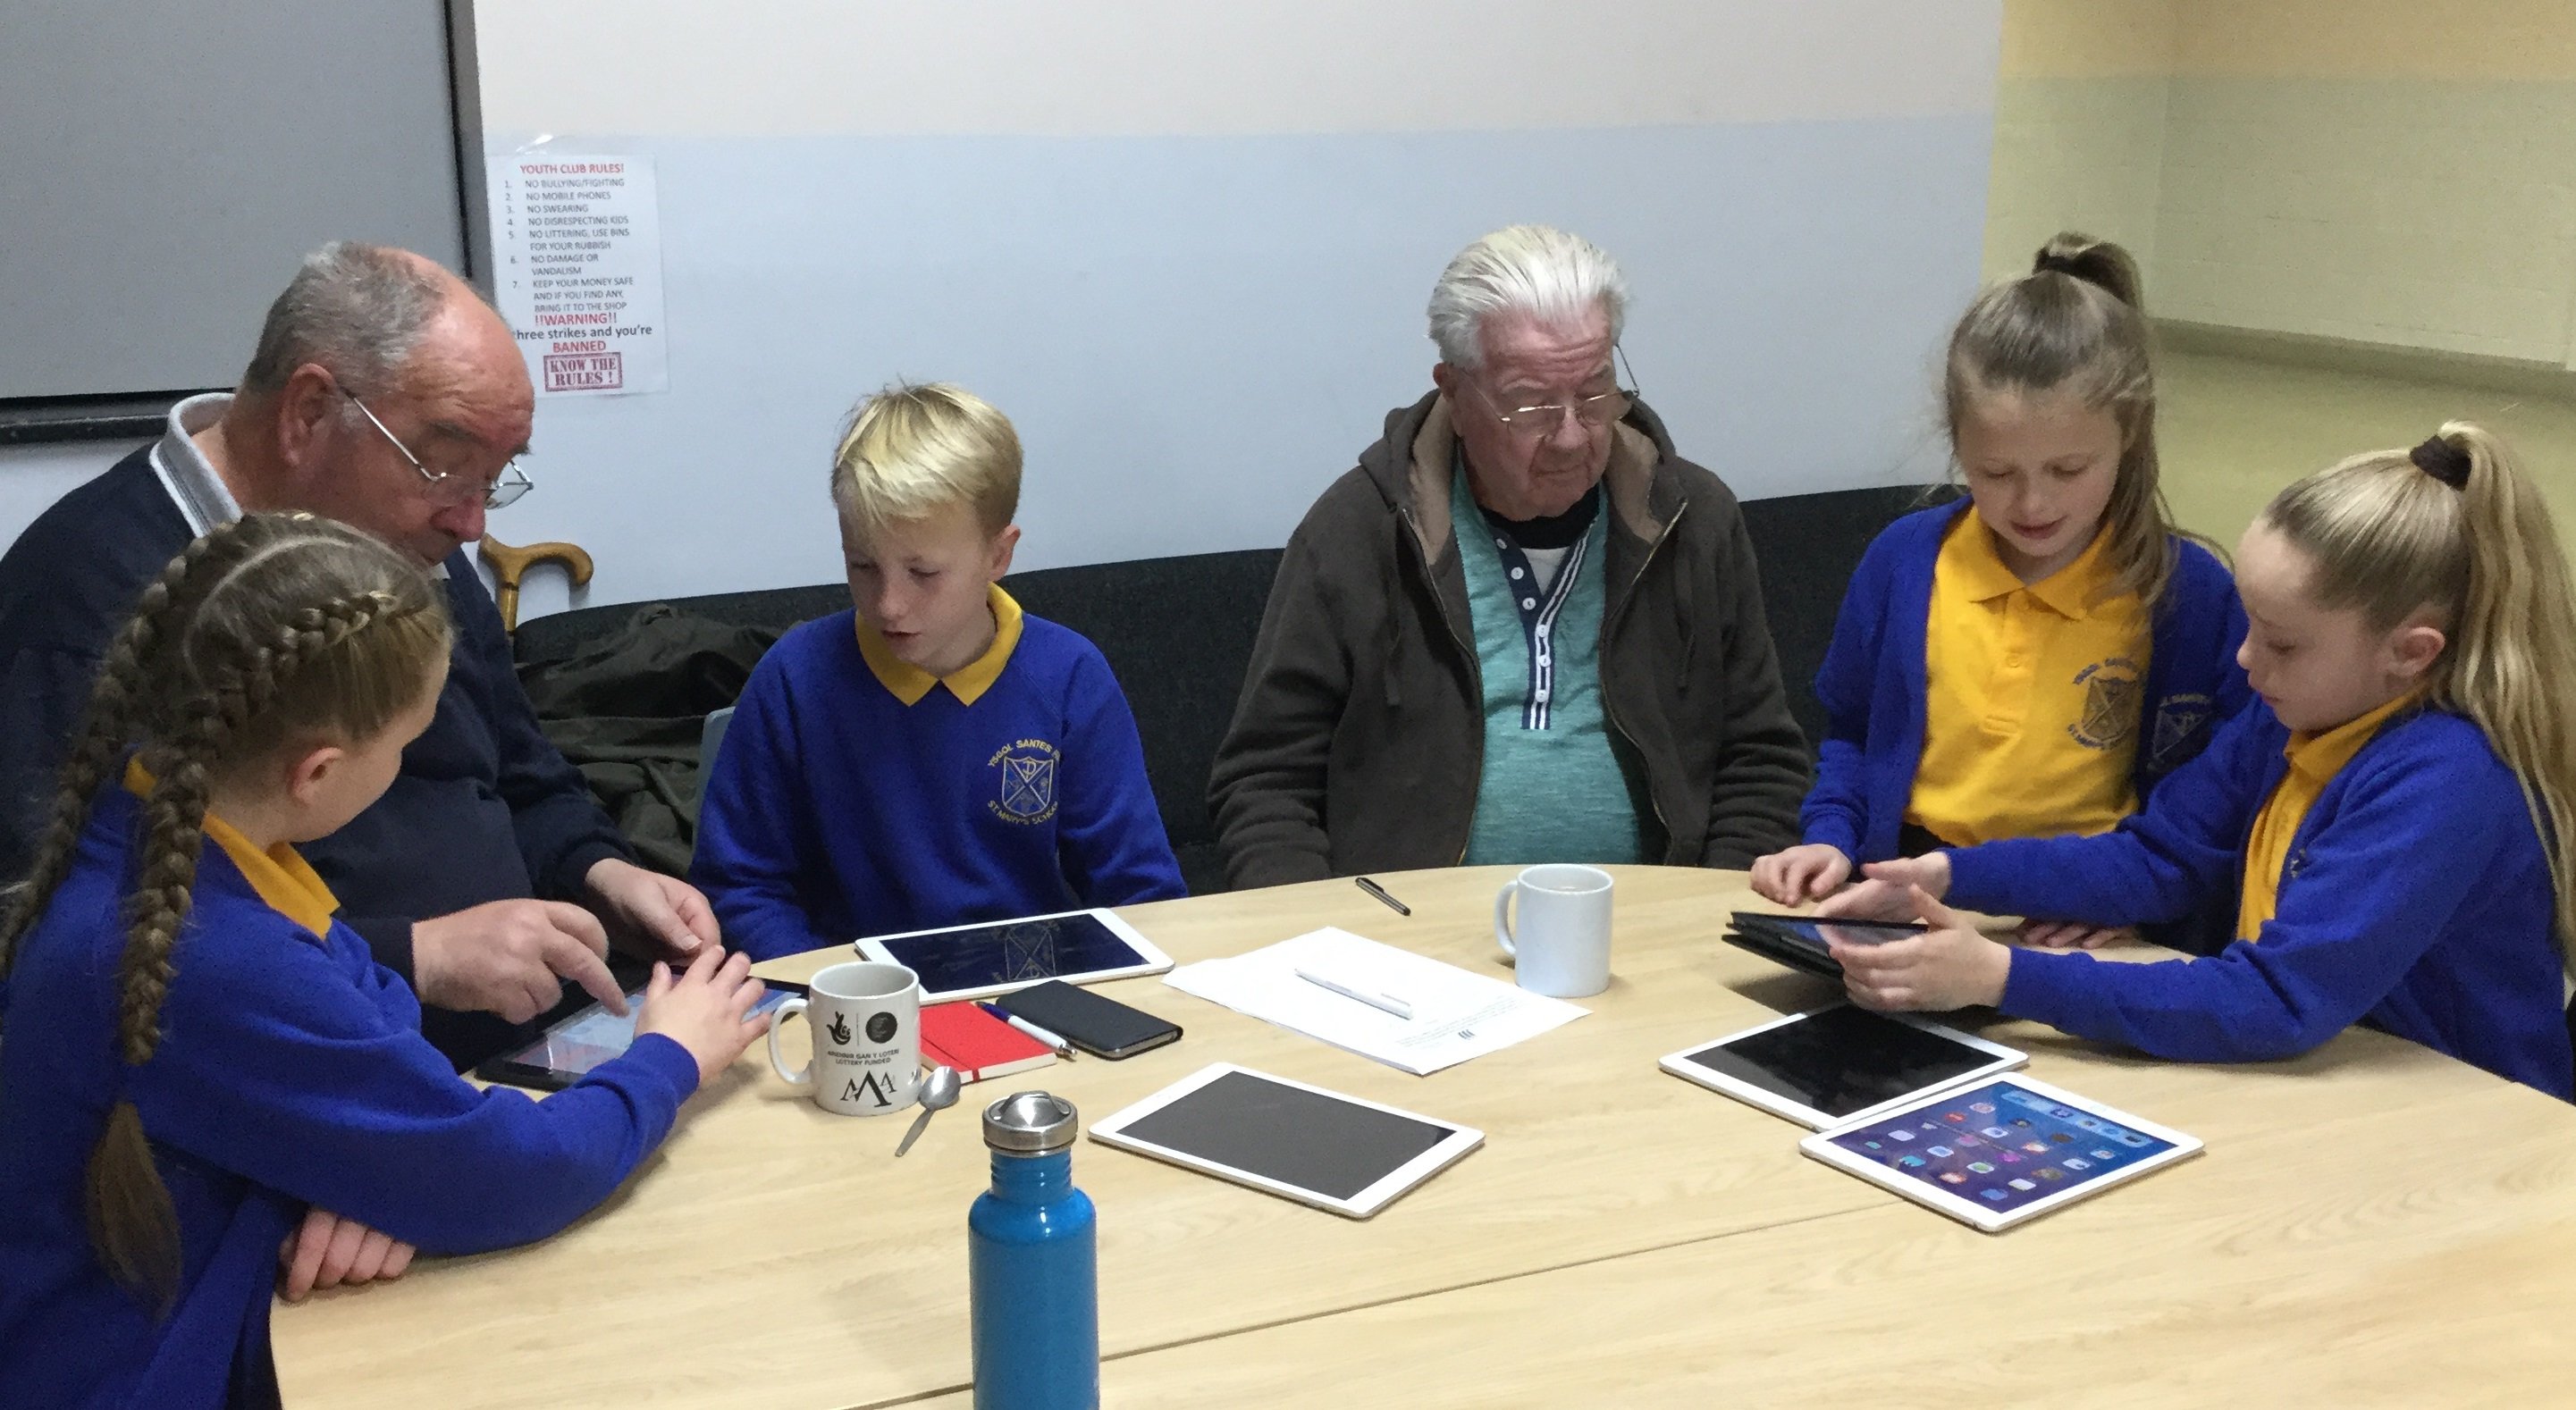 school children show two older men how to use a tablet device